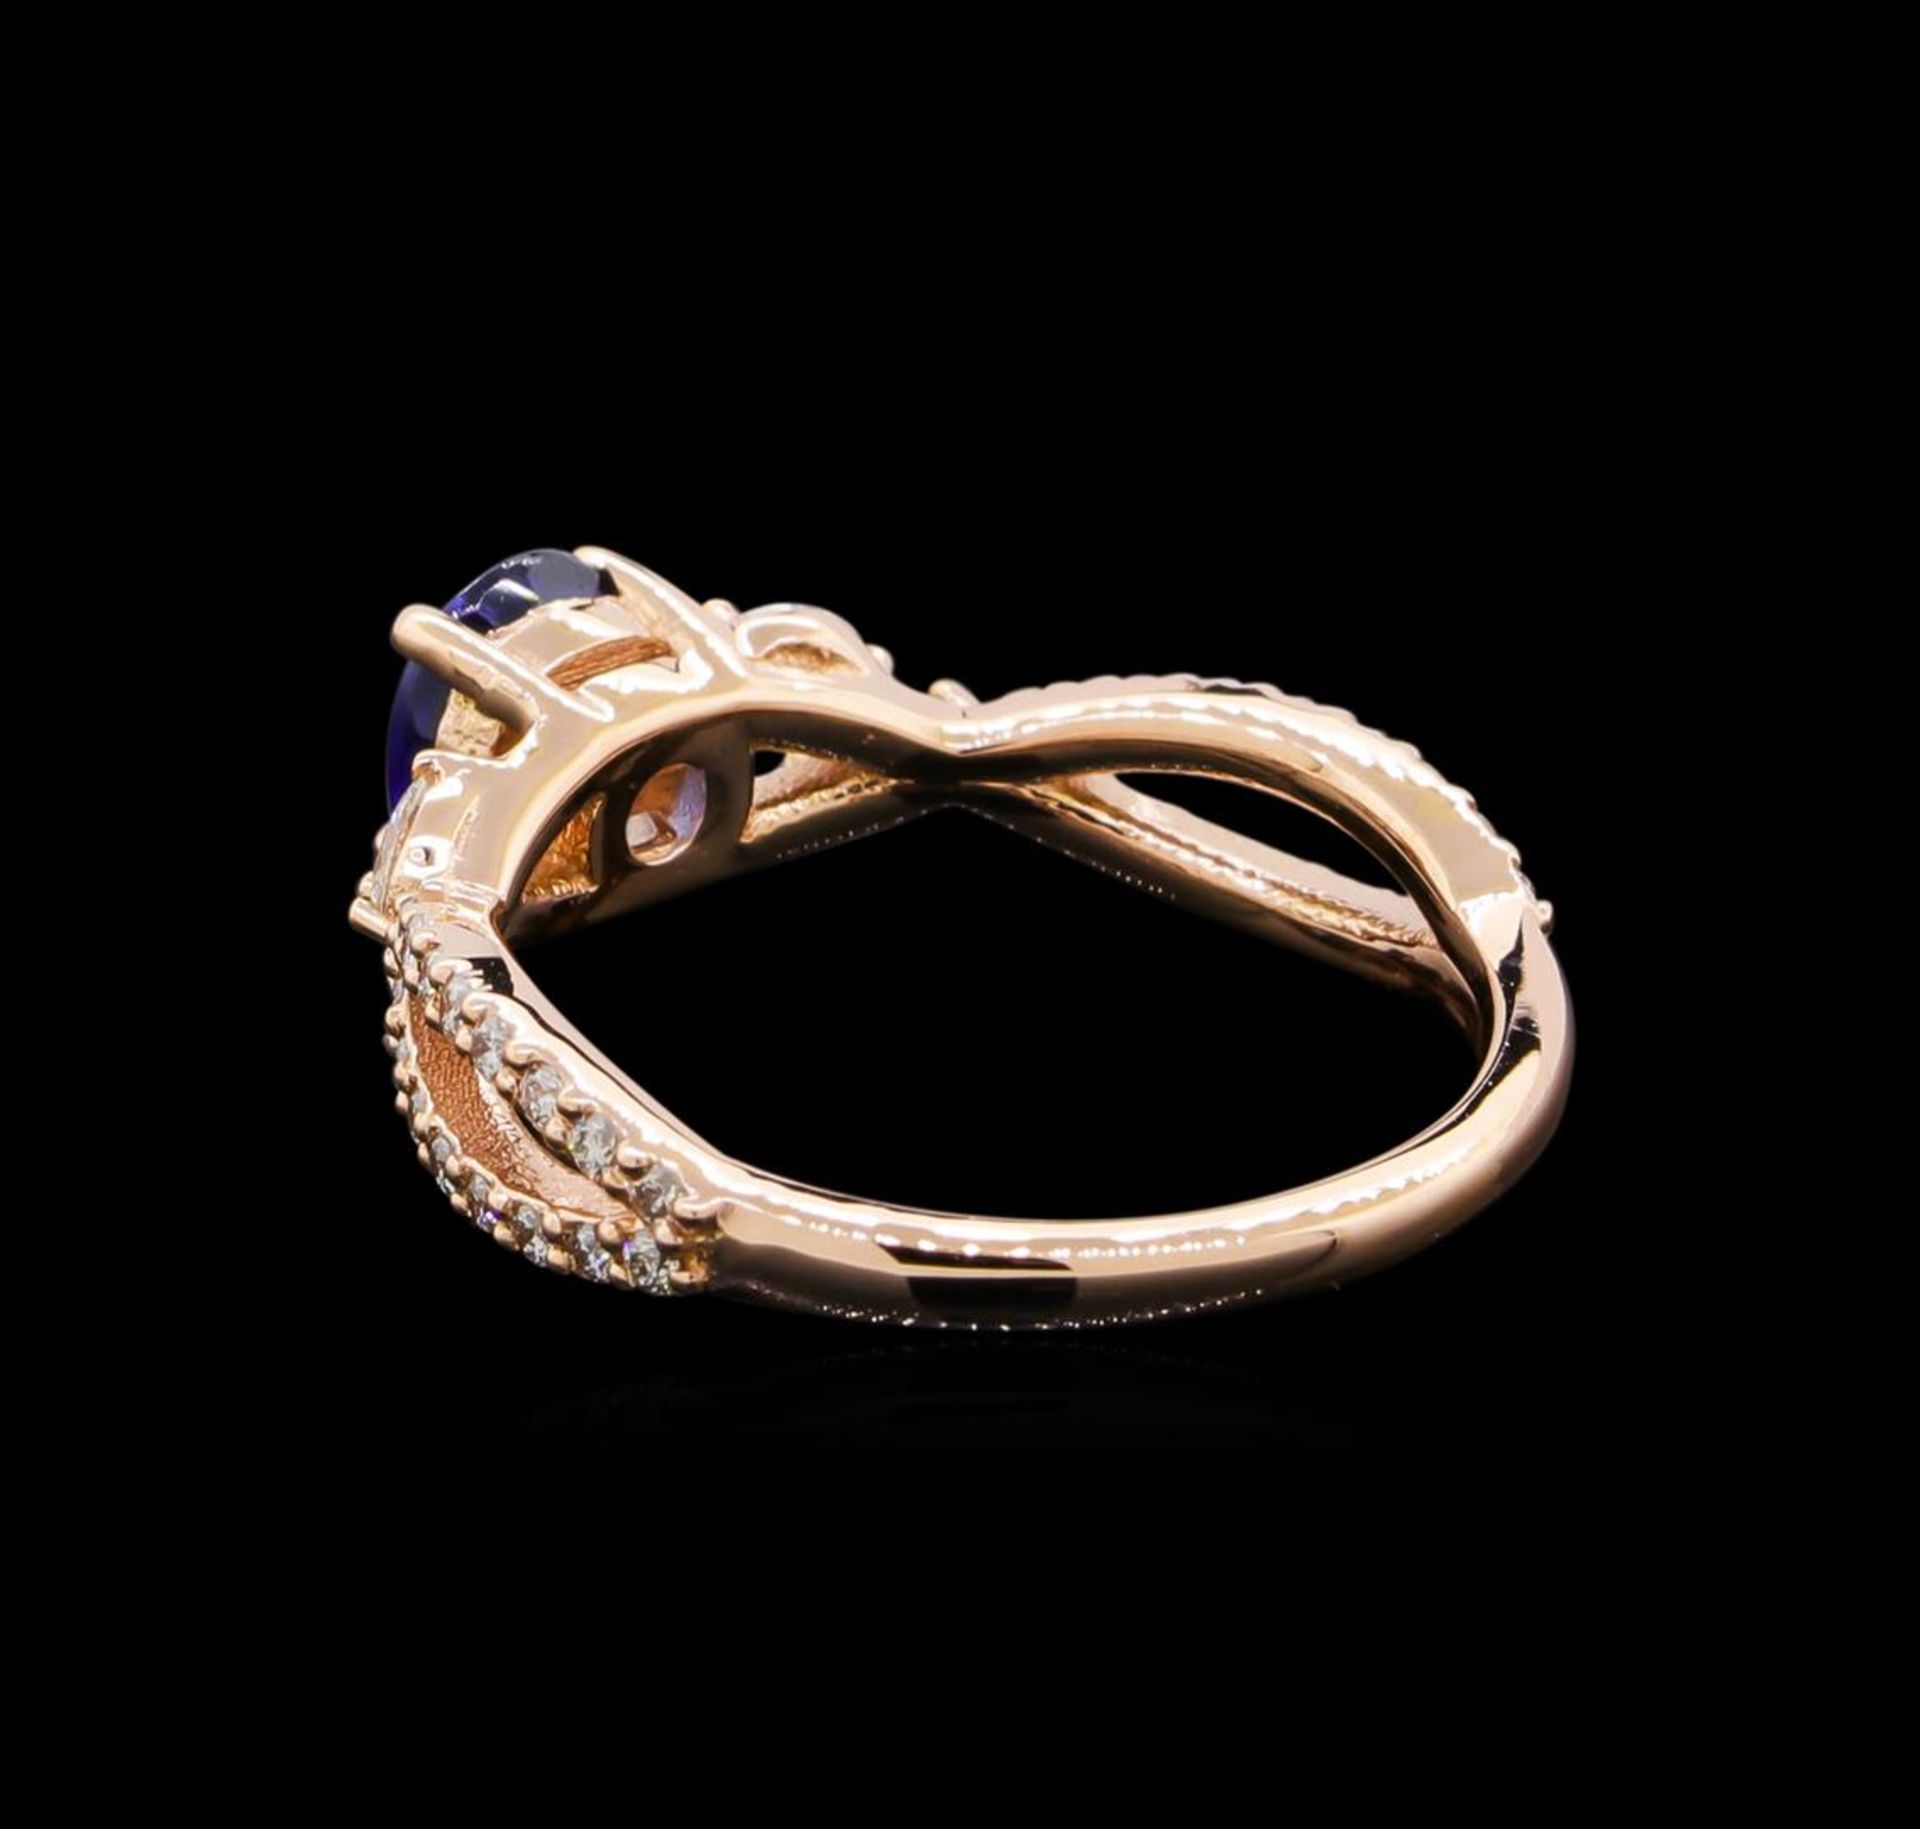 0.71 ctw Sapphire and Diamond Ring - 14KT Rose Gold - Image 3 of 4